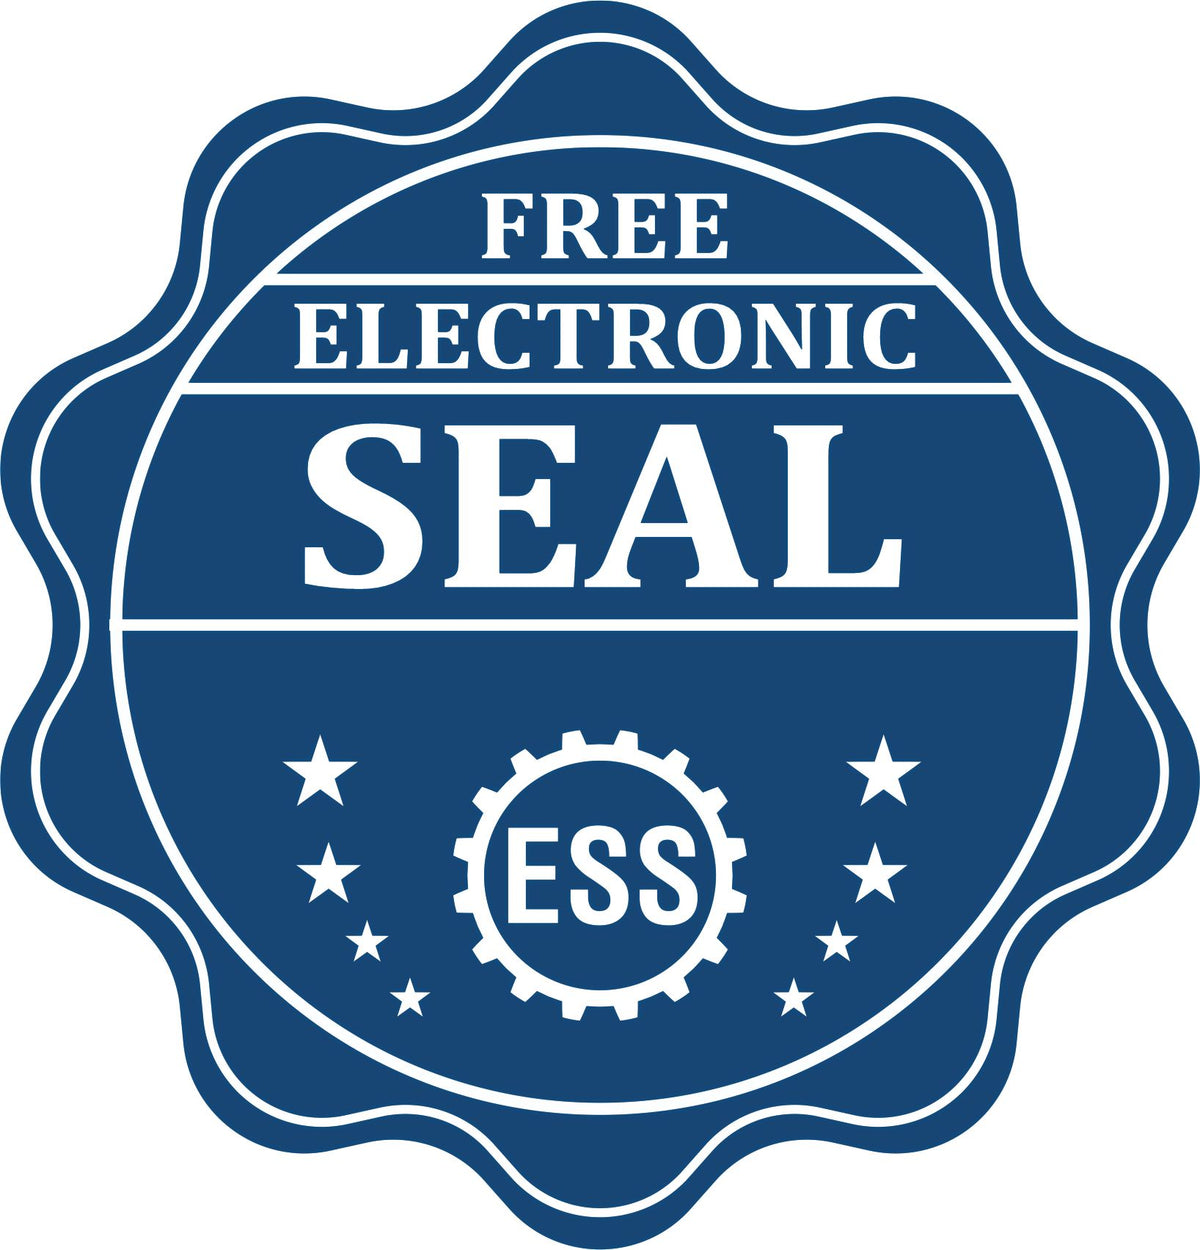 A badge showing a free electronic seal for the Long Reach Connecticut Geology Seal with stars and the ESS gear on the emblem.